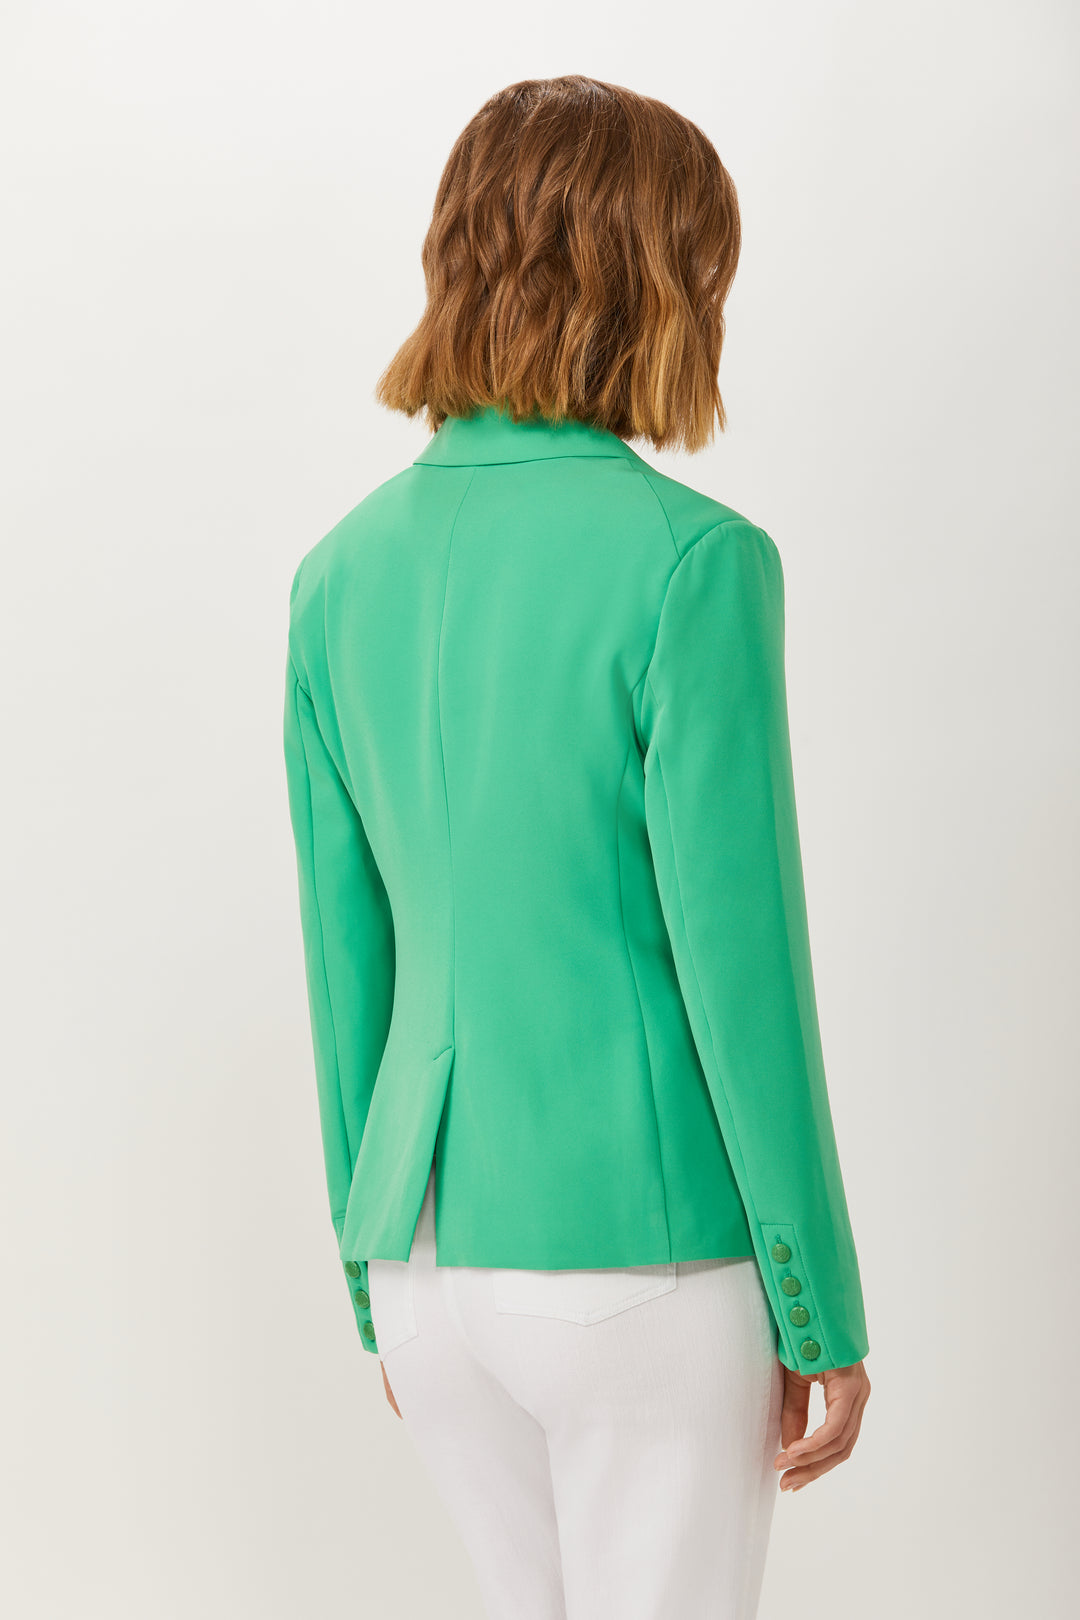 Double Breasted Jacket - Spring Green